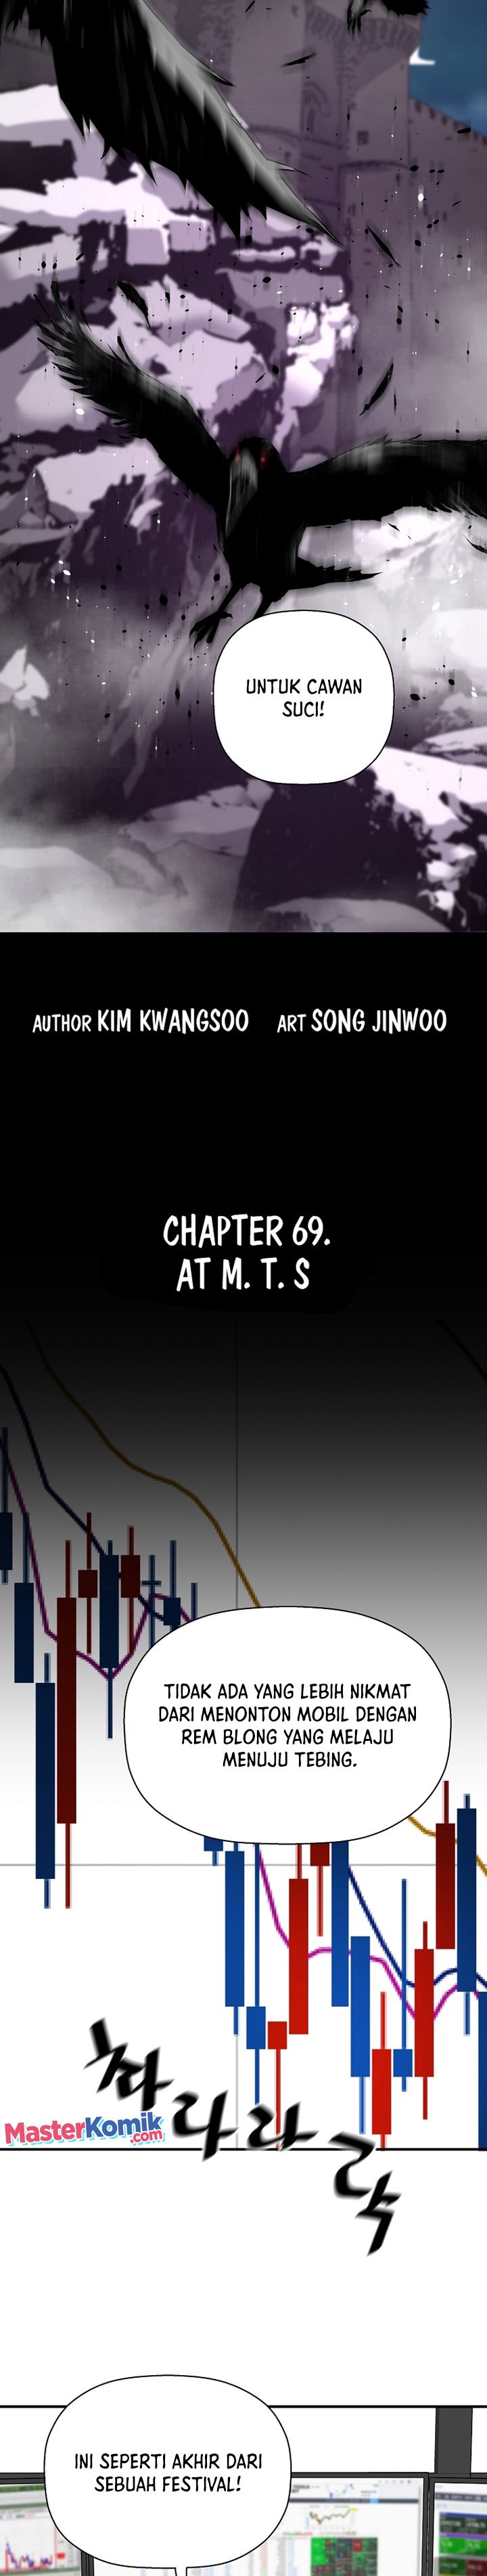 Return Of The Legend Chapter 69 - 209